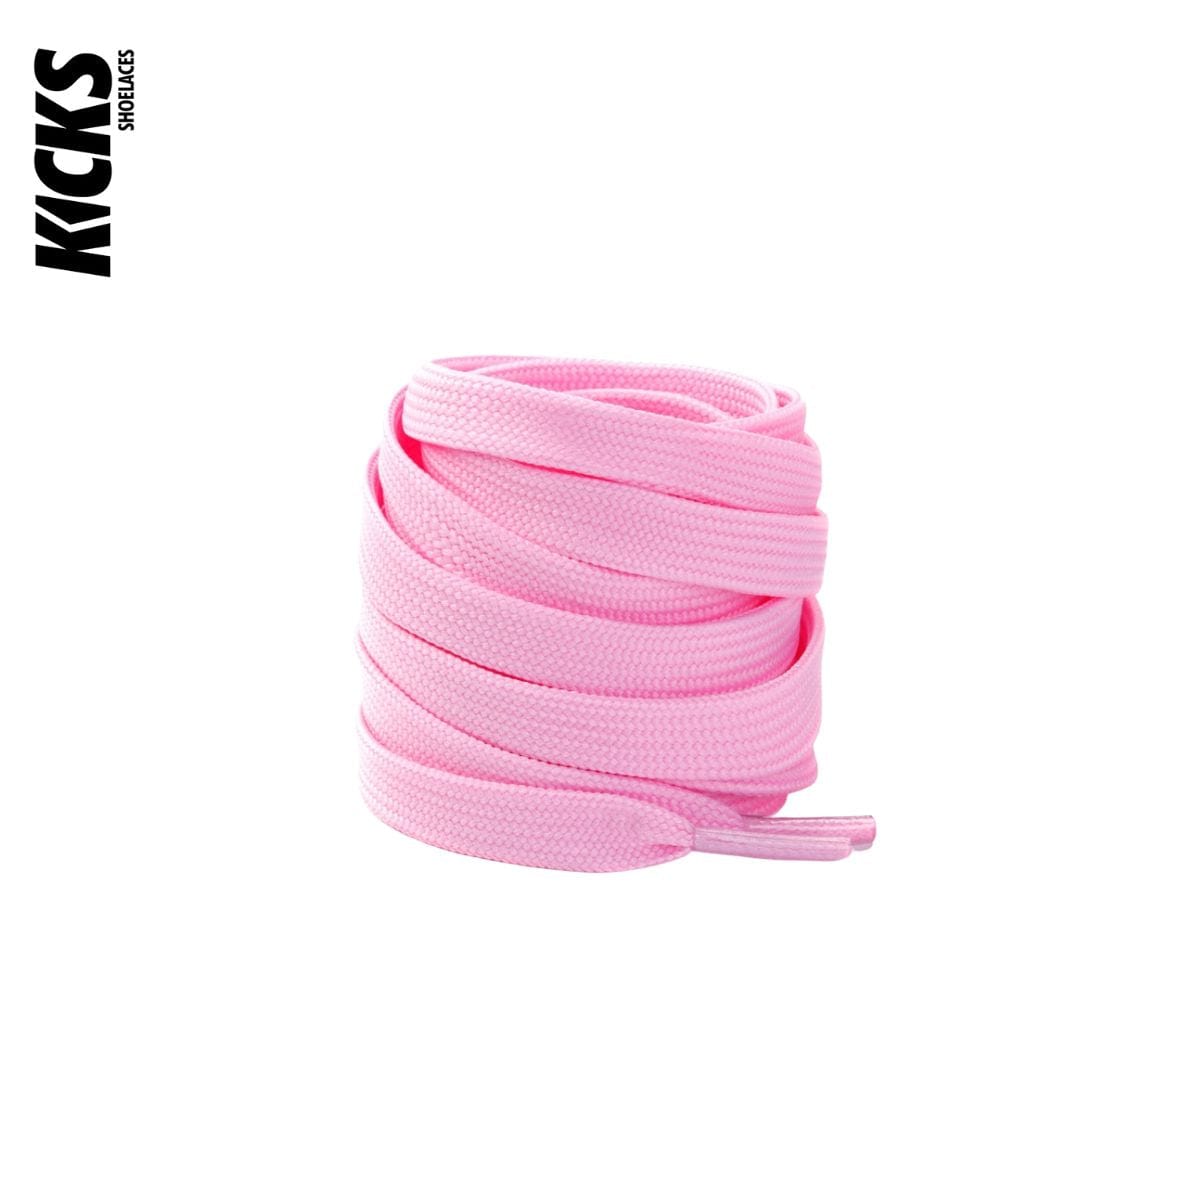 Pink Replacement Shoe Laces for Adidas NMD Sneakers by Kicks Shoelaces